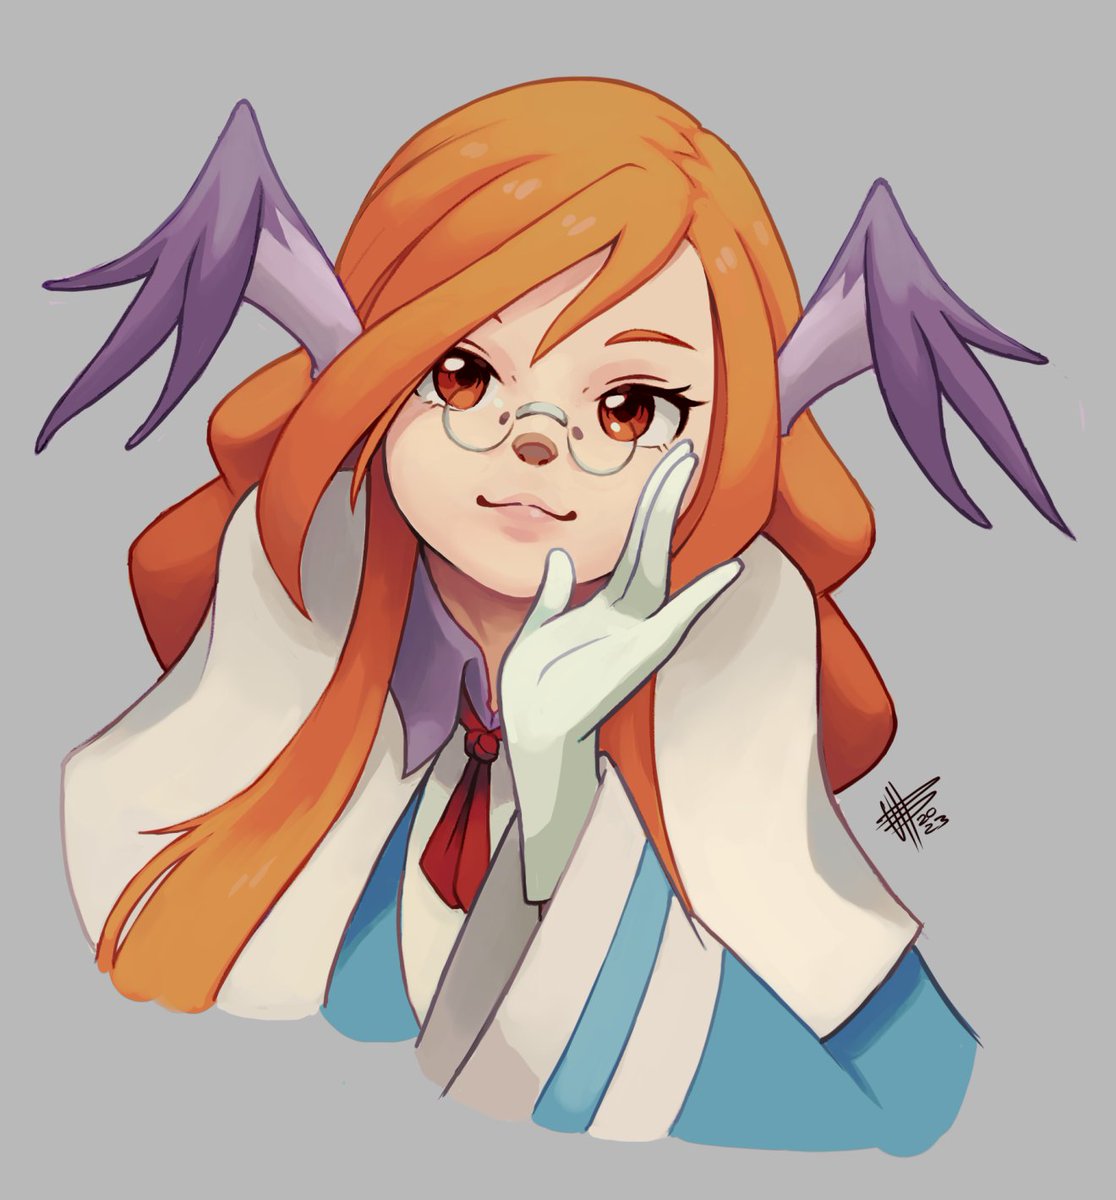 「Momo from Breath of Fire 3, technically 」|Mateus - UPDのイラスト